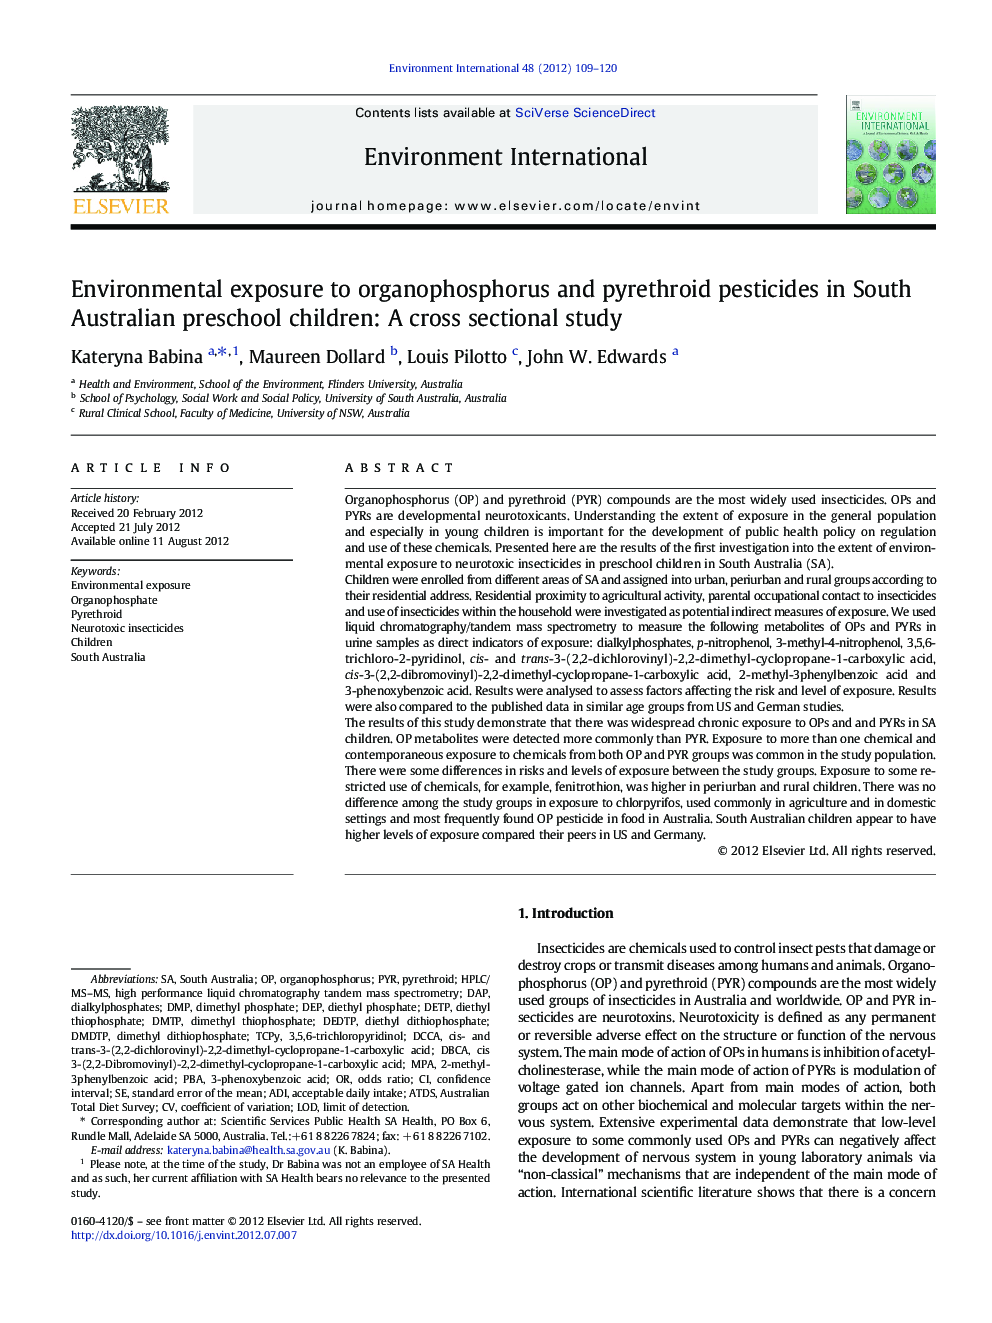 Environmental exposure to organophosphorus and pyrethroid pesticides in South Australian preschool children: A cross sectional study